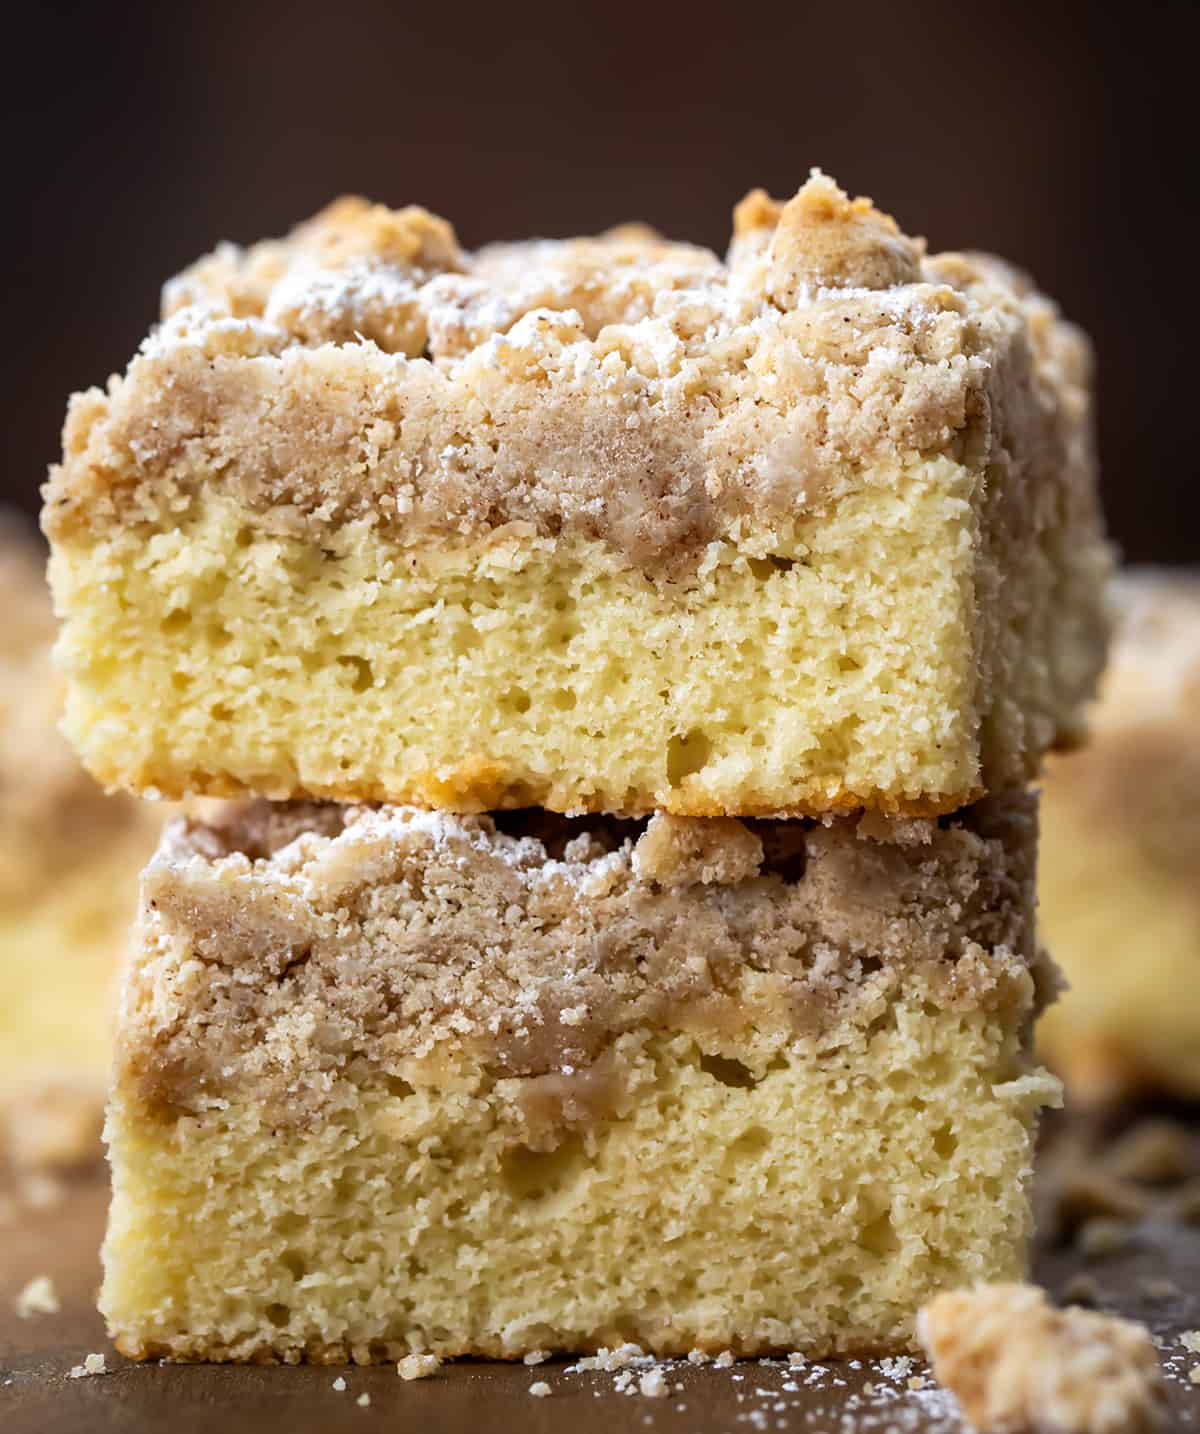 Crumb Cake stacked on a wooden table.